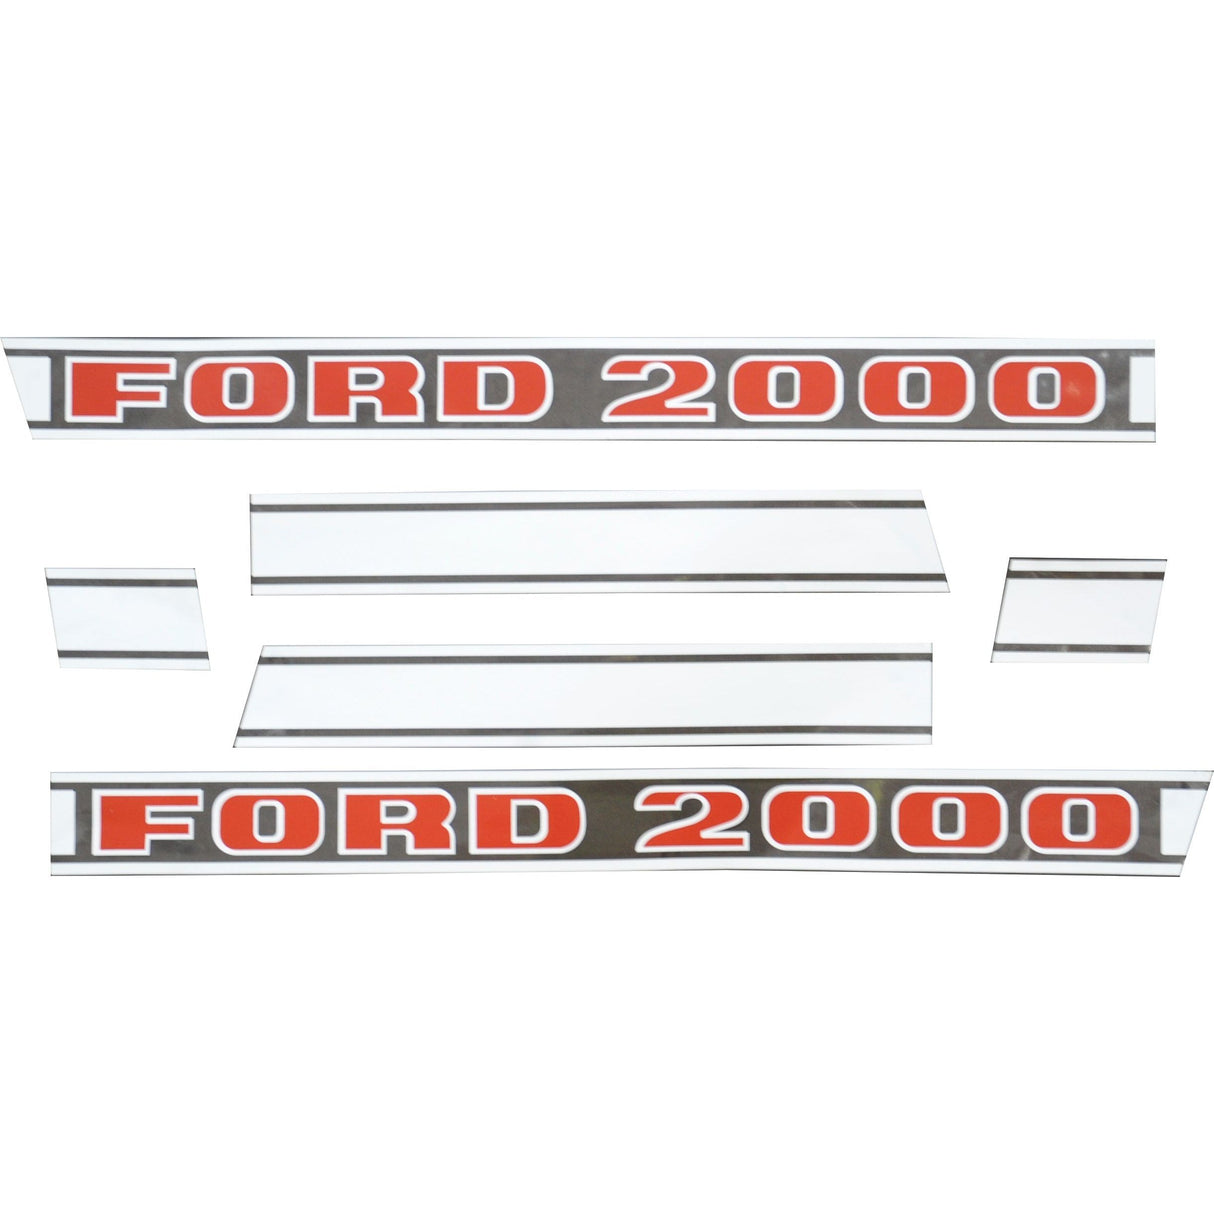 Decal Set - Ford / New Holland 2000
 - S.8409 - Farming Parts